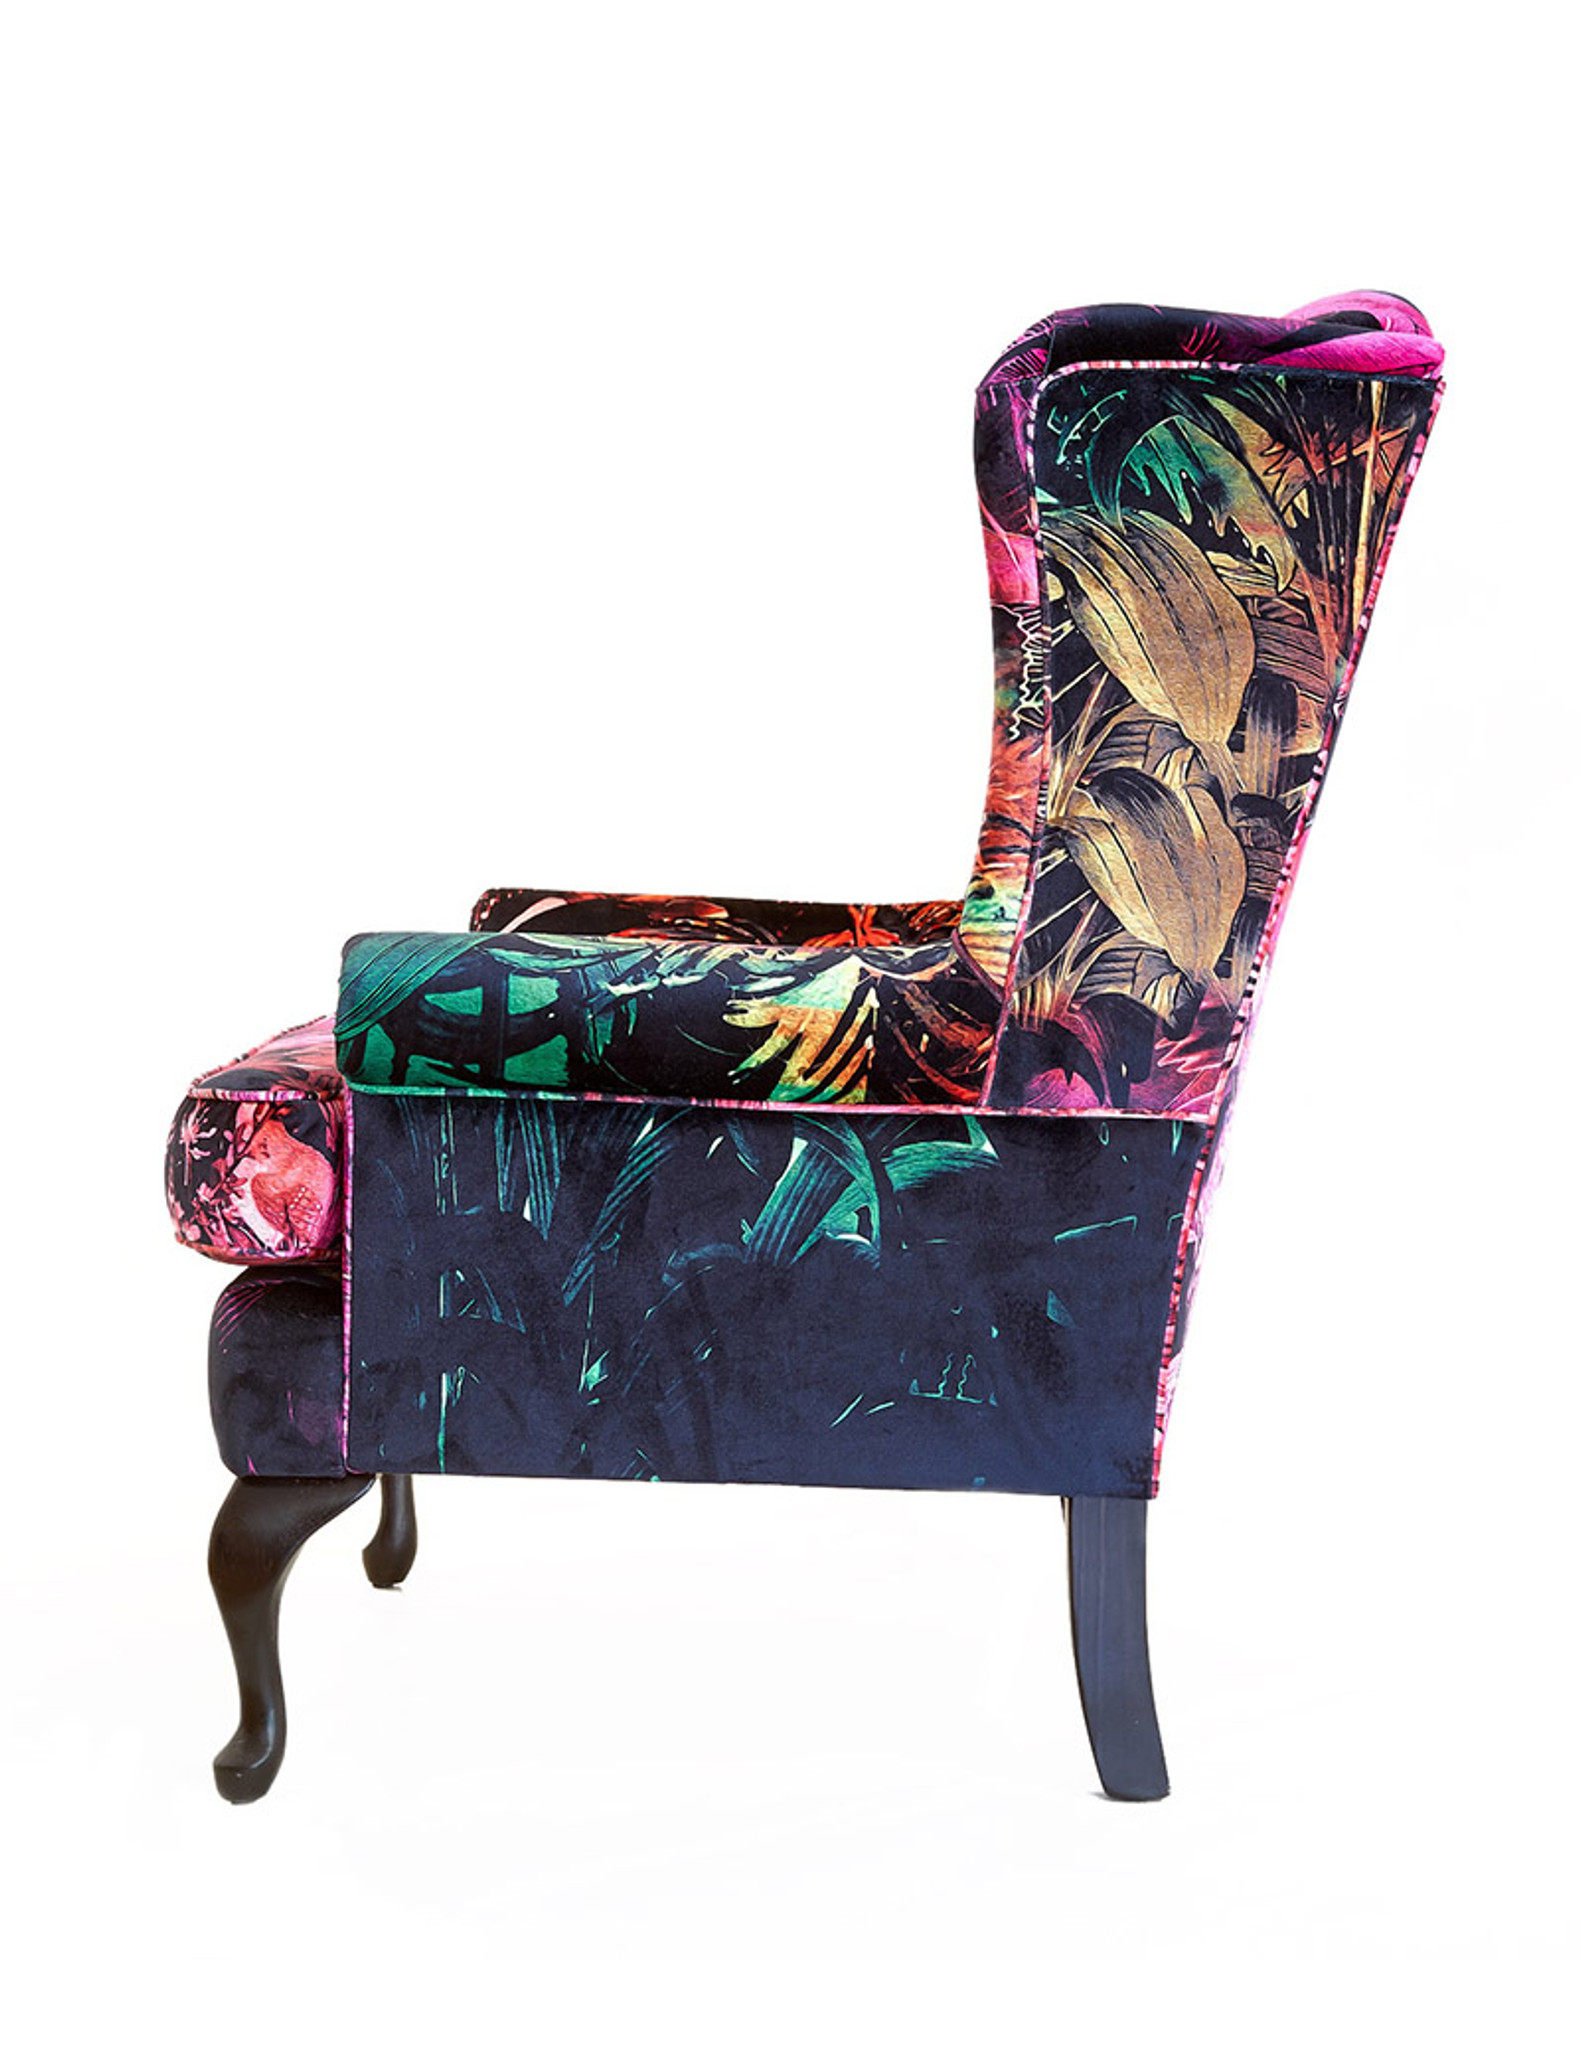 SOLD - VINTAGE CHAIR - JUNGLE VIBE UPHOLSTERY